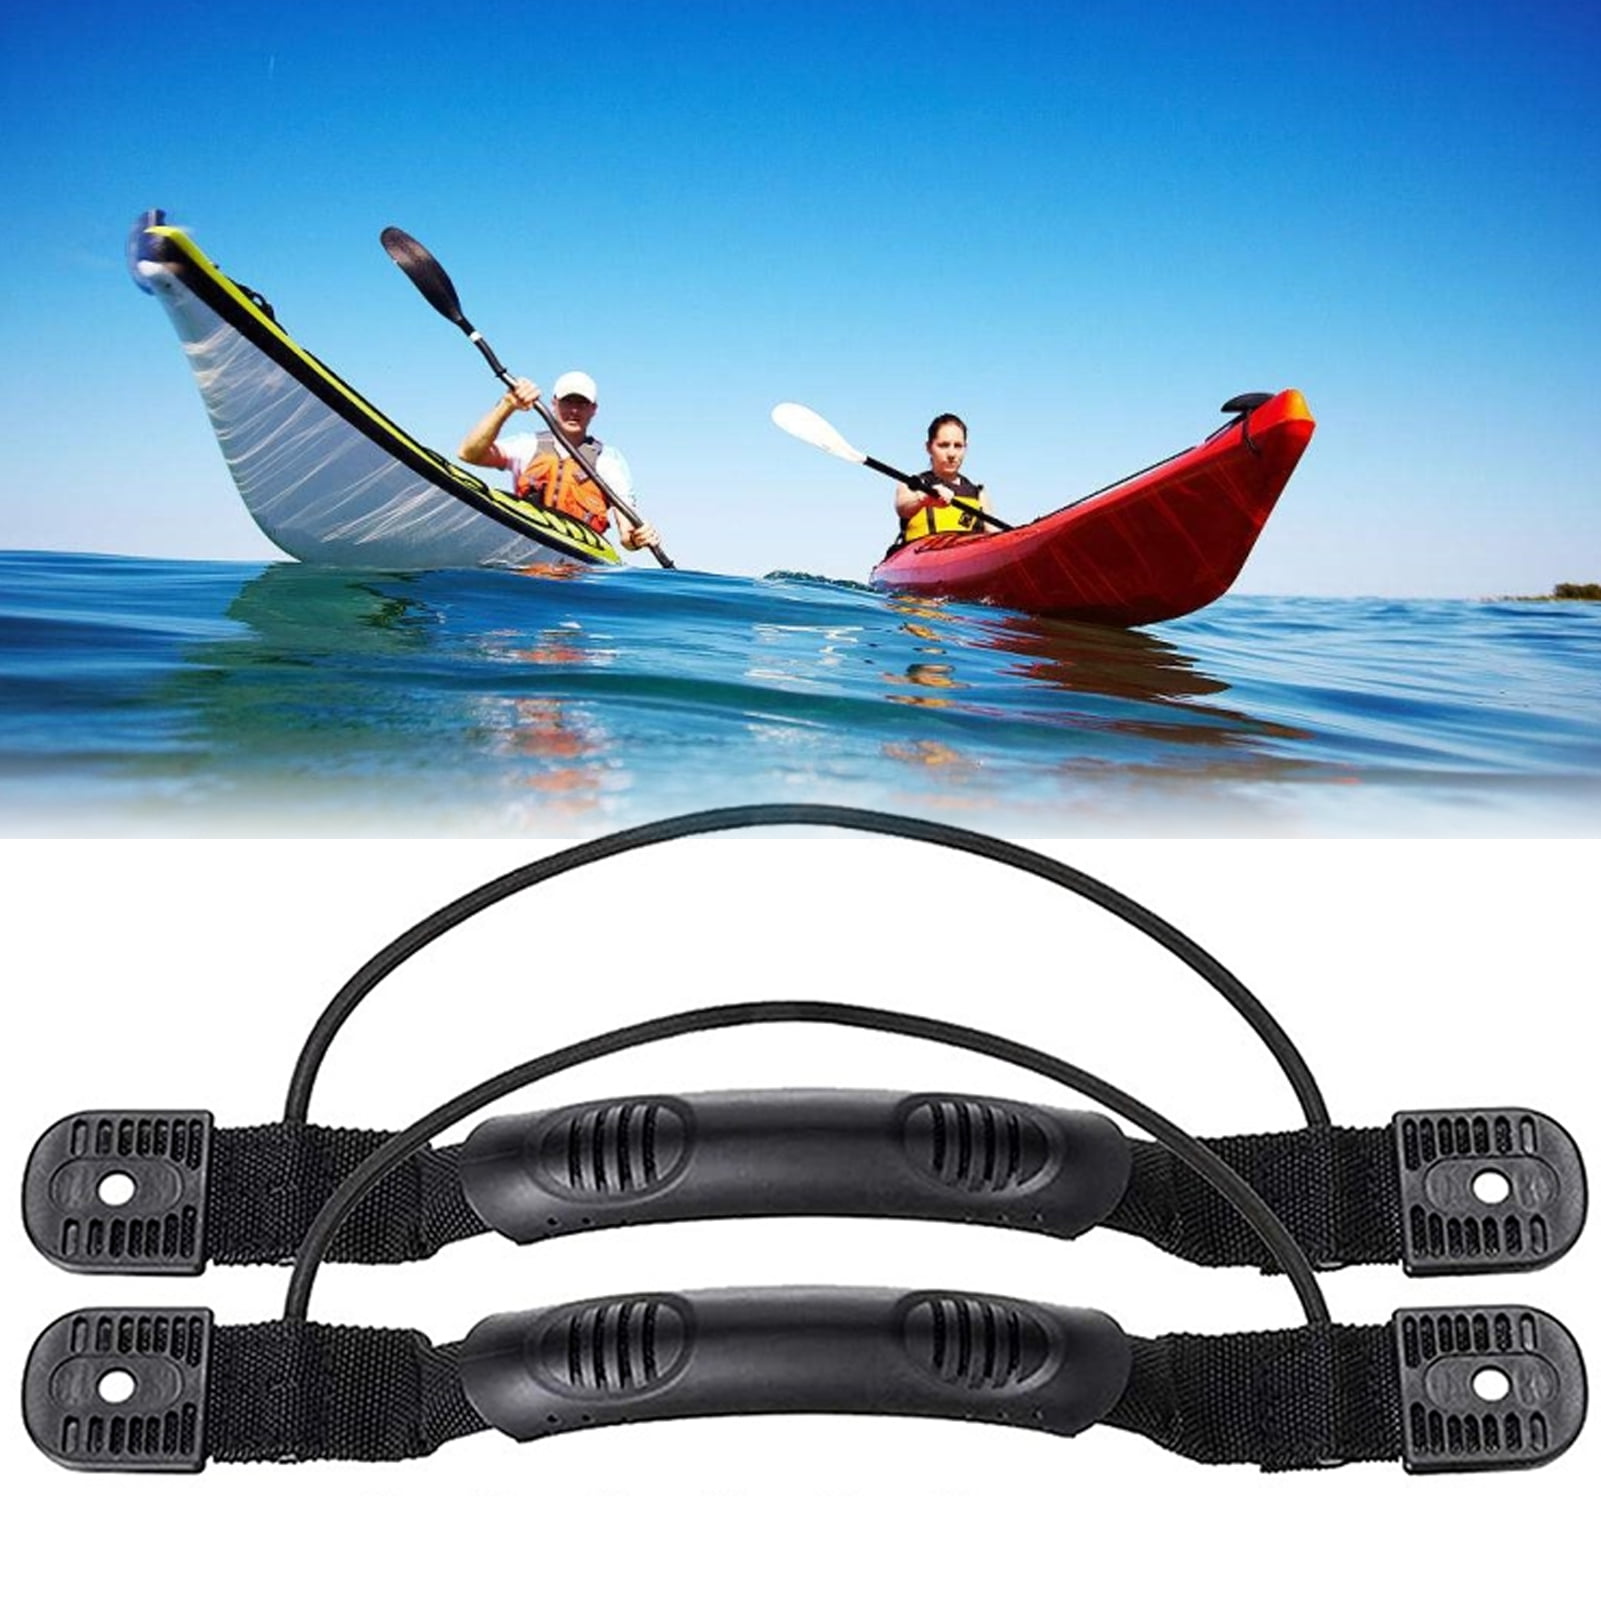 6x Emergency Survival Whistle for Scuba Diving Kayaking Water Sports Outdoor 